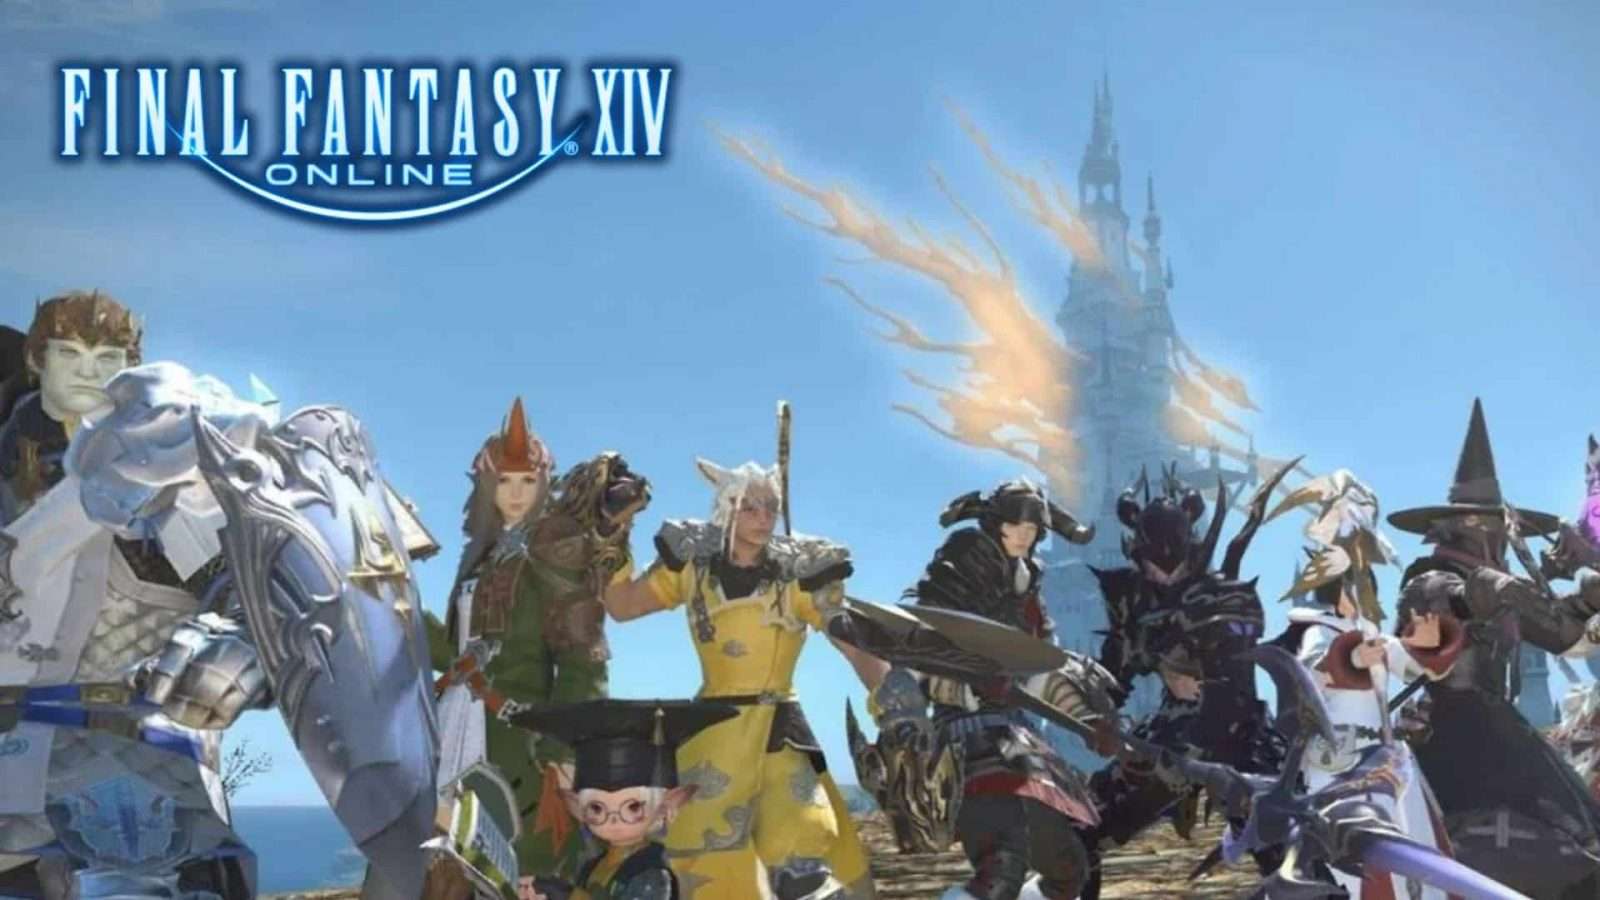 cast of characters together in final fantasy 14